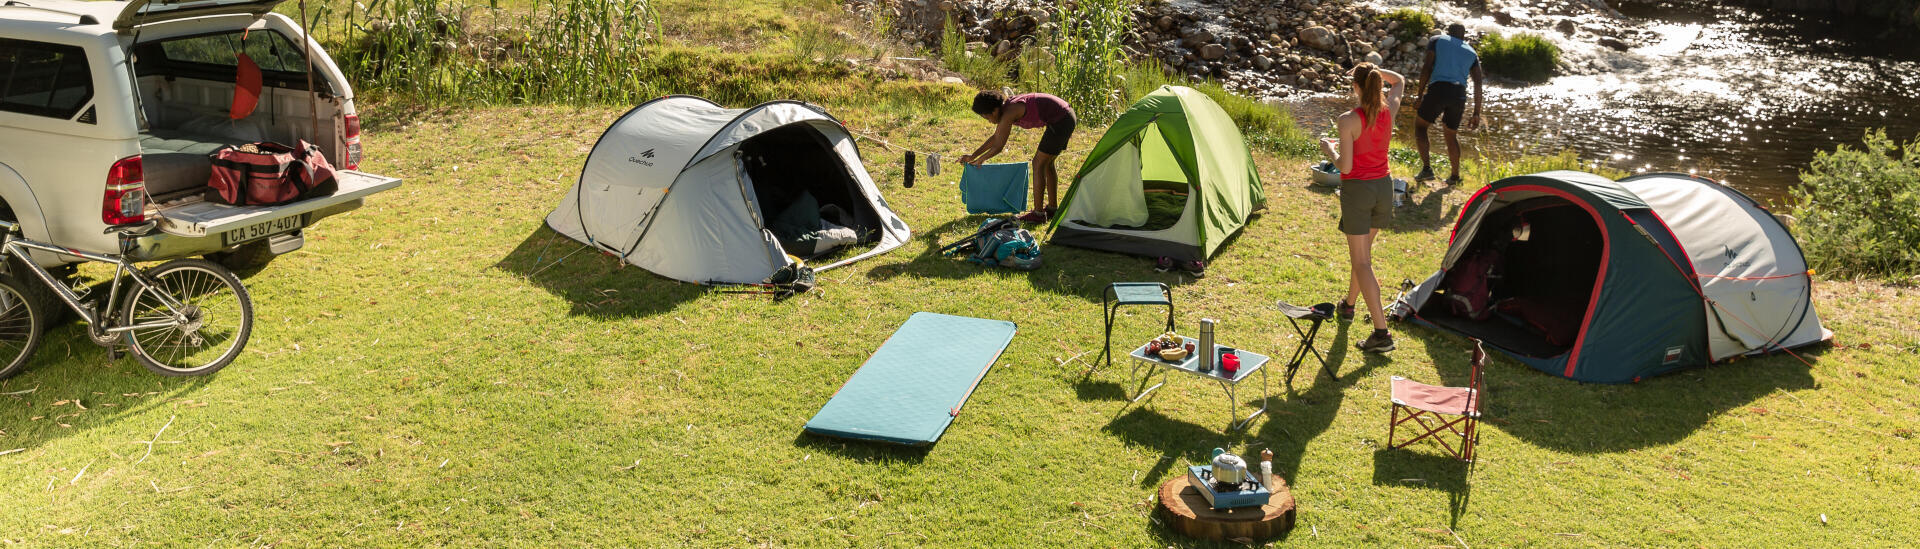 How to choose the best Decathlon camping tent